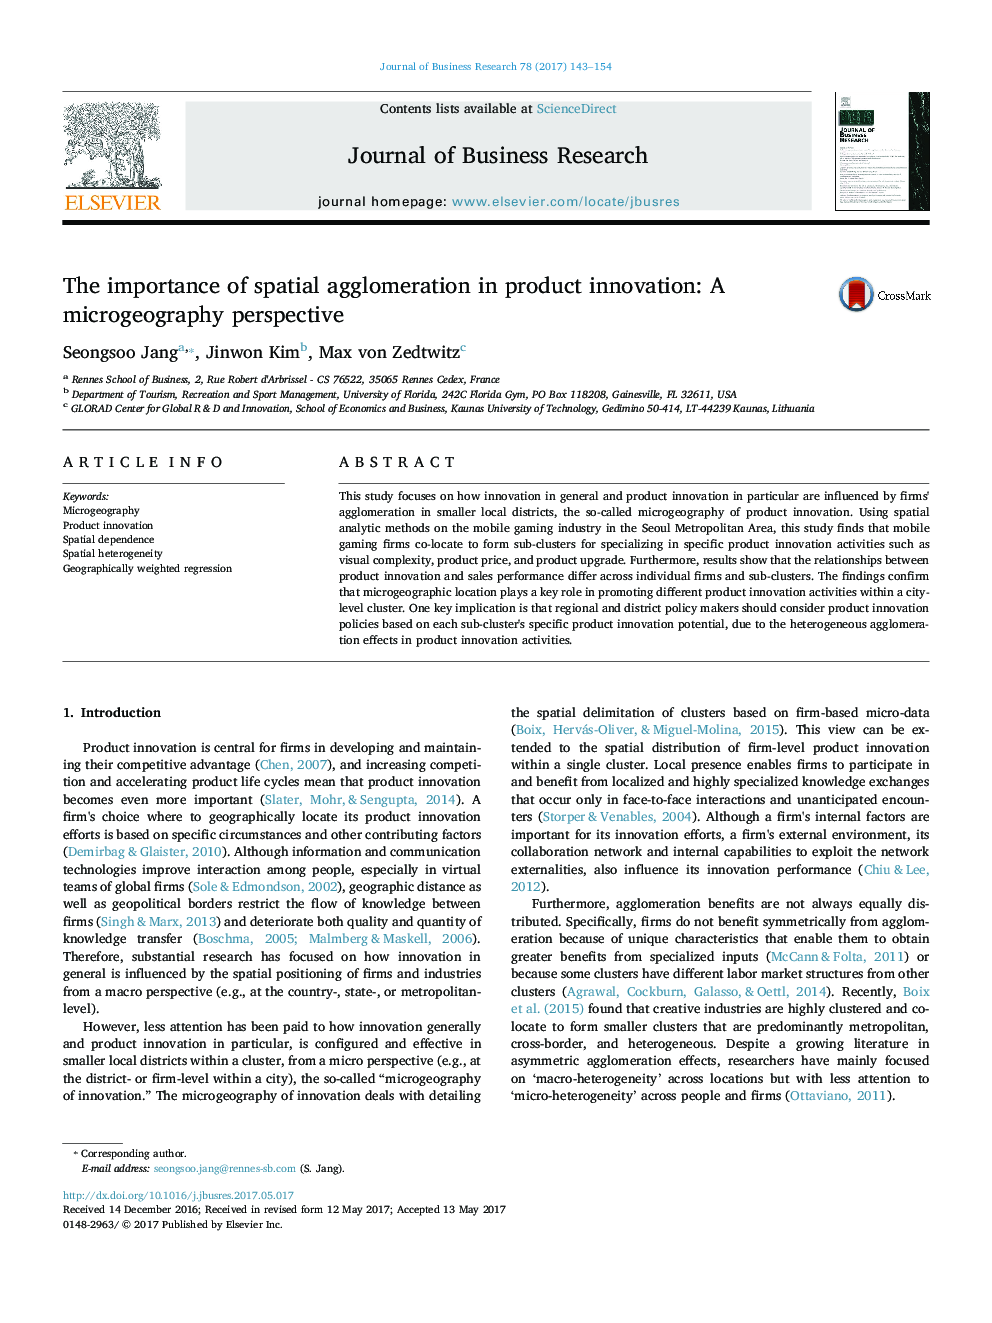 The importance of spatial agglomeration in product innovation: A microgeography perspective